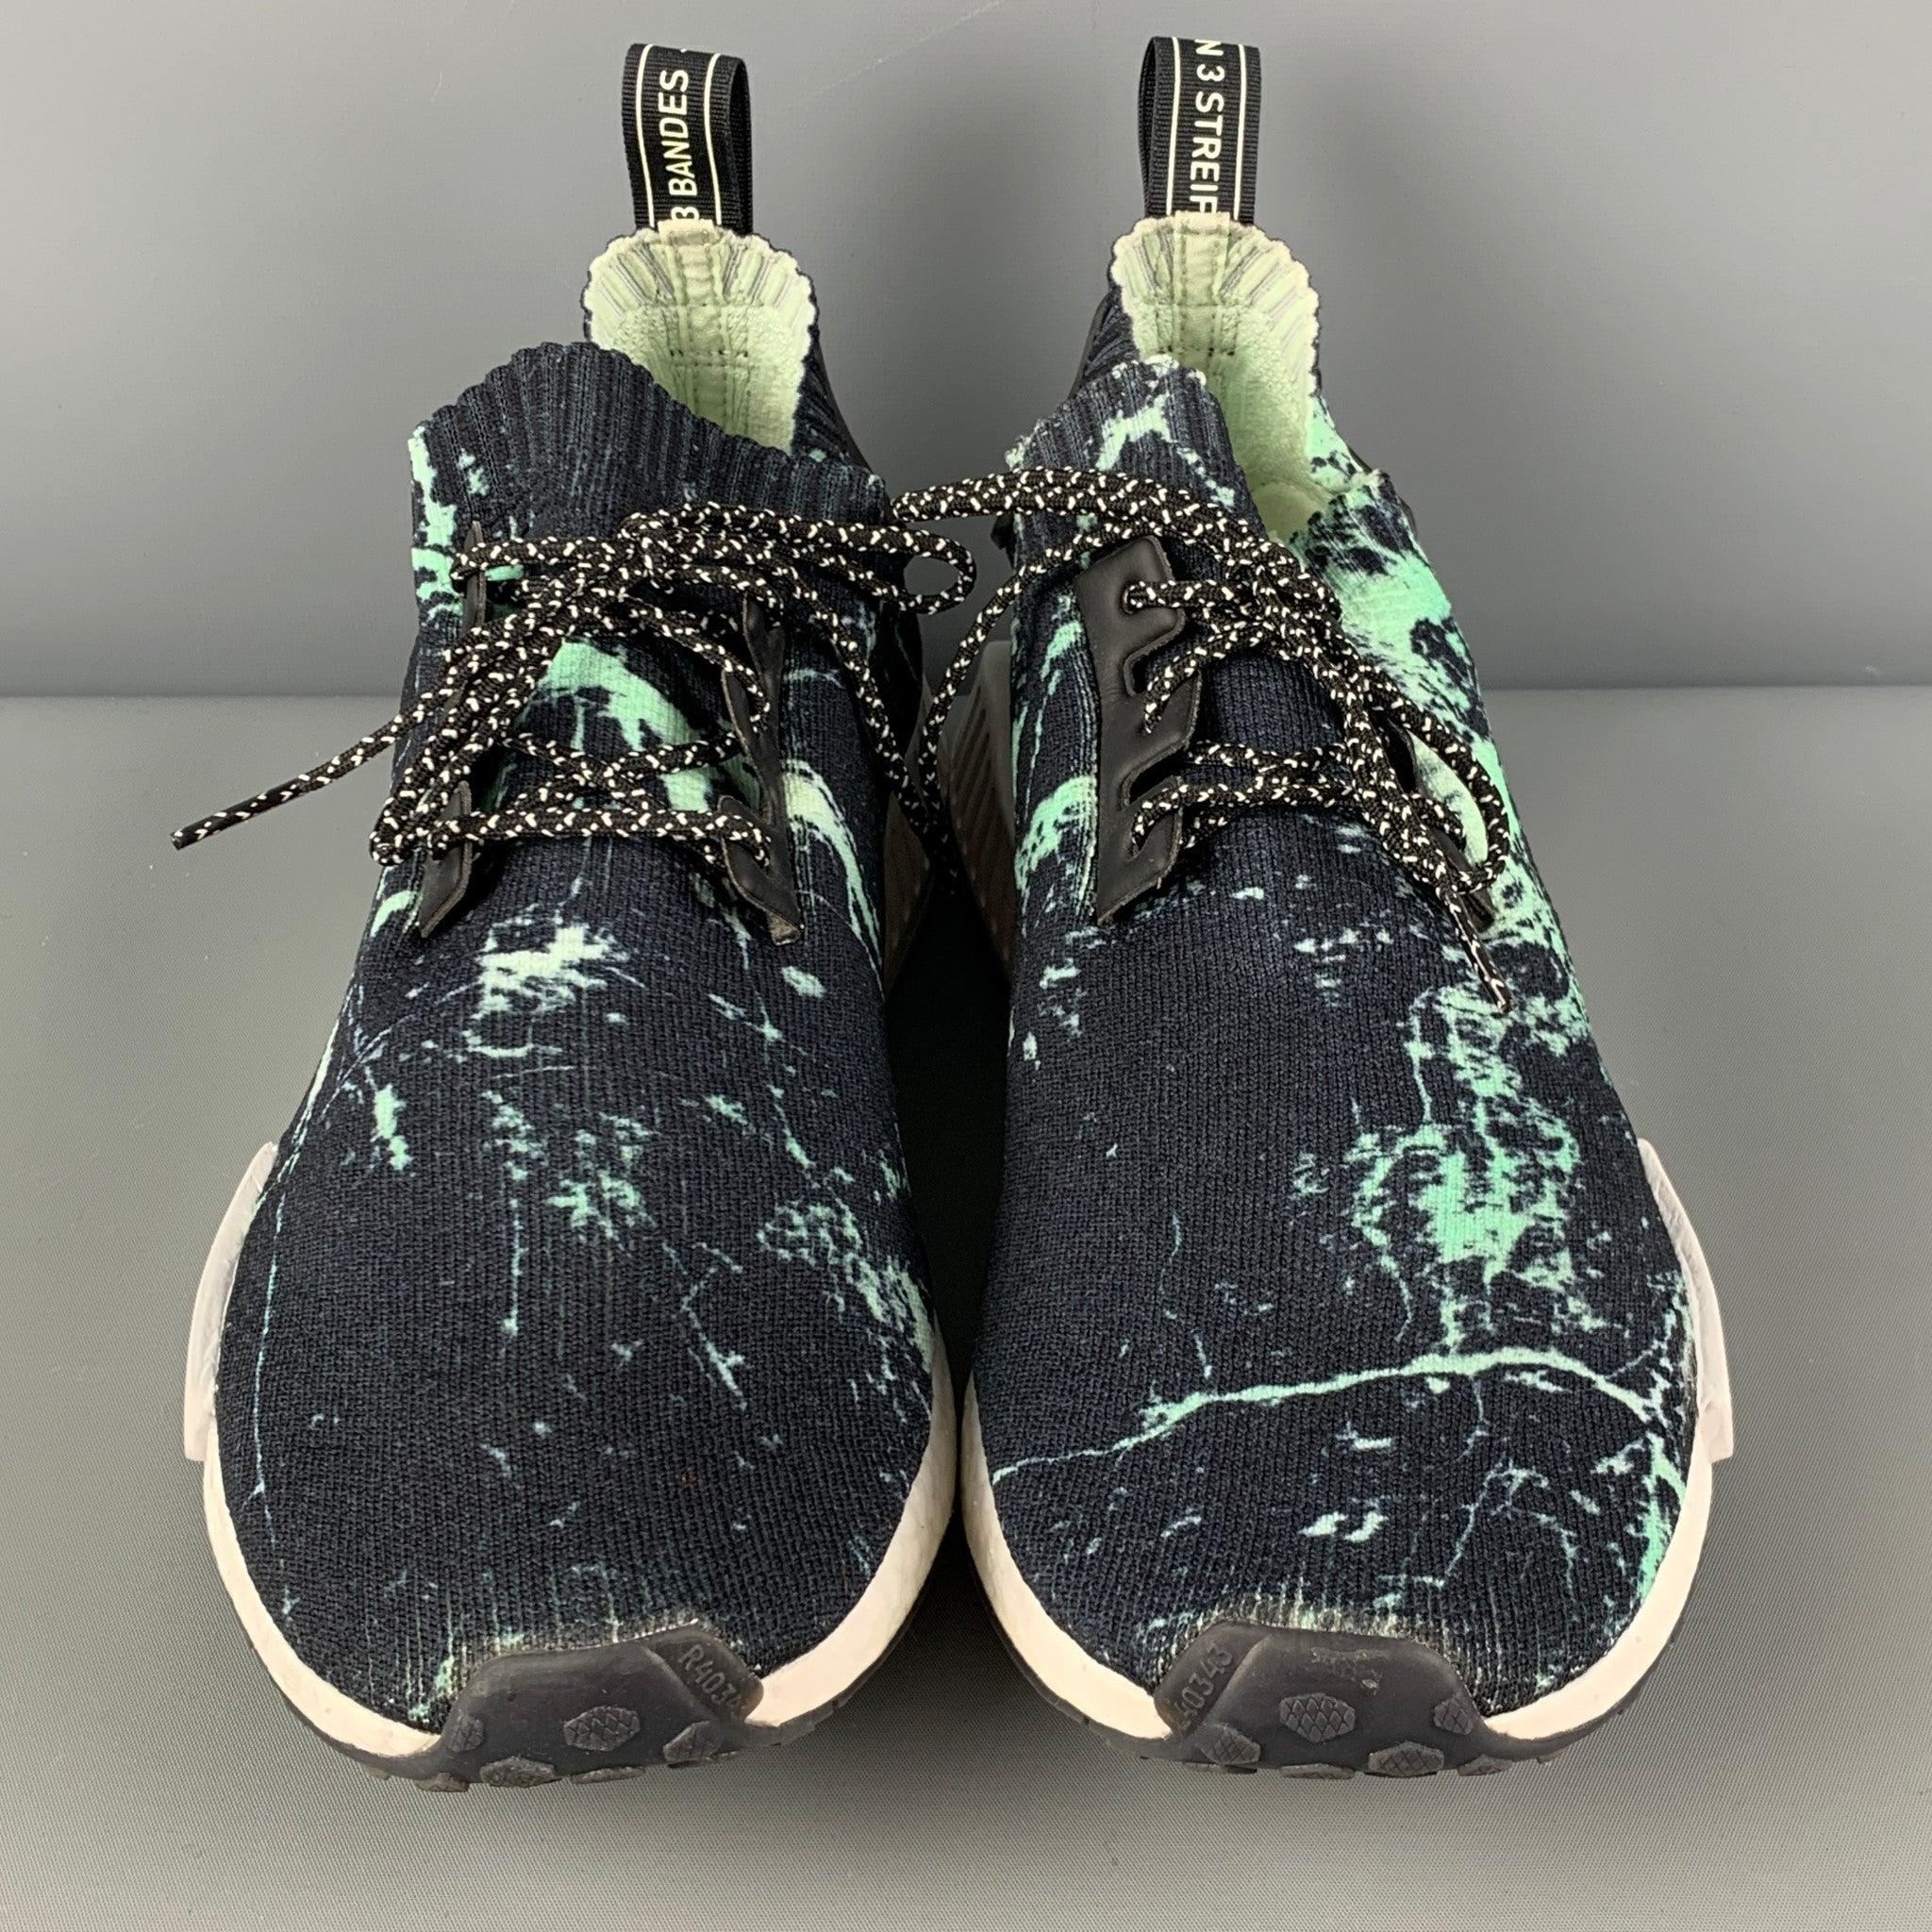 Men's ADIDAS NMD R1 PK Size 12.5 Black Green Splattered Nylon Lace Up Sneakers For Sale